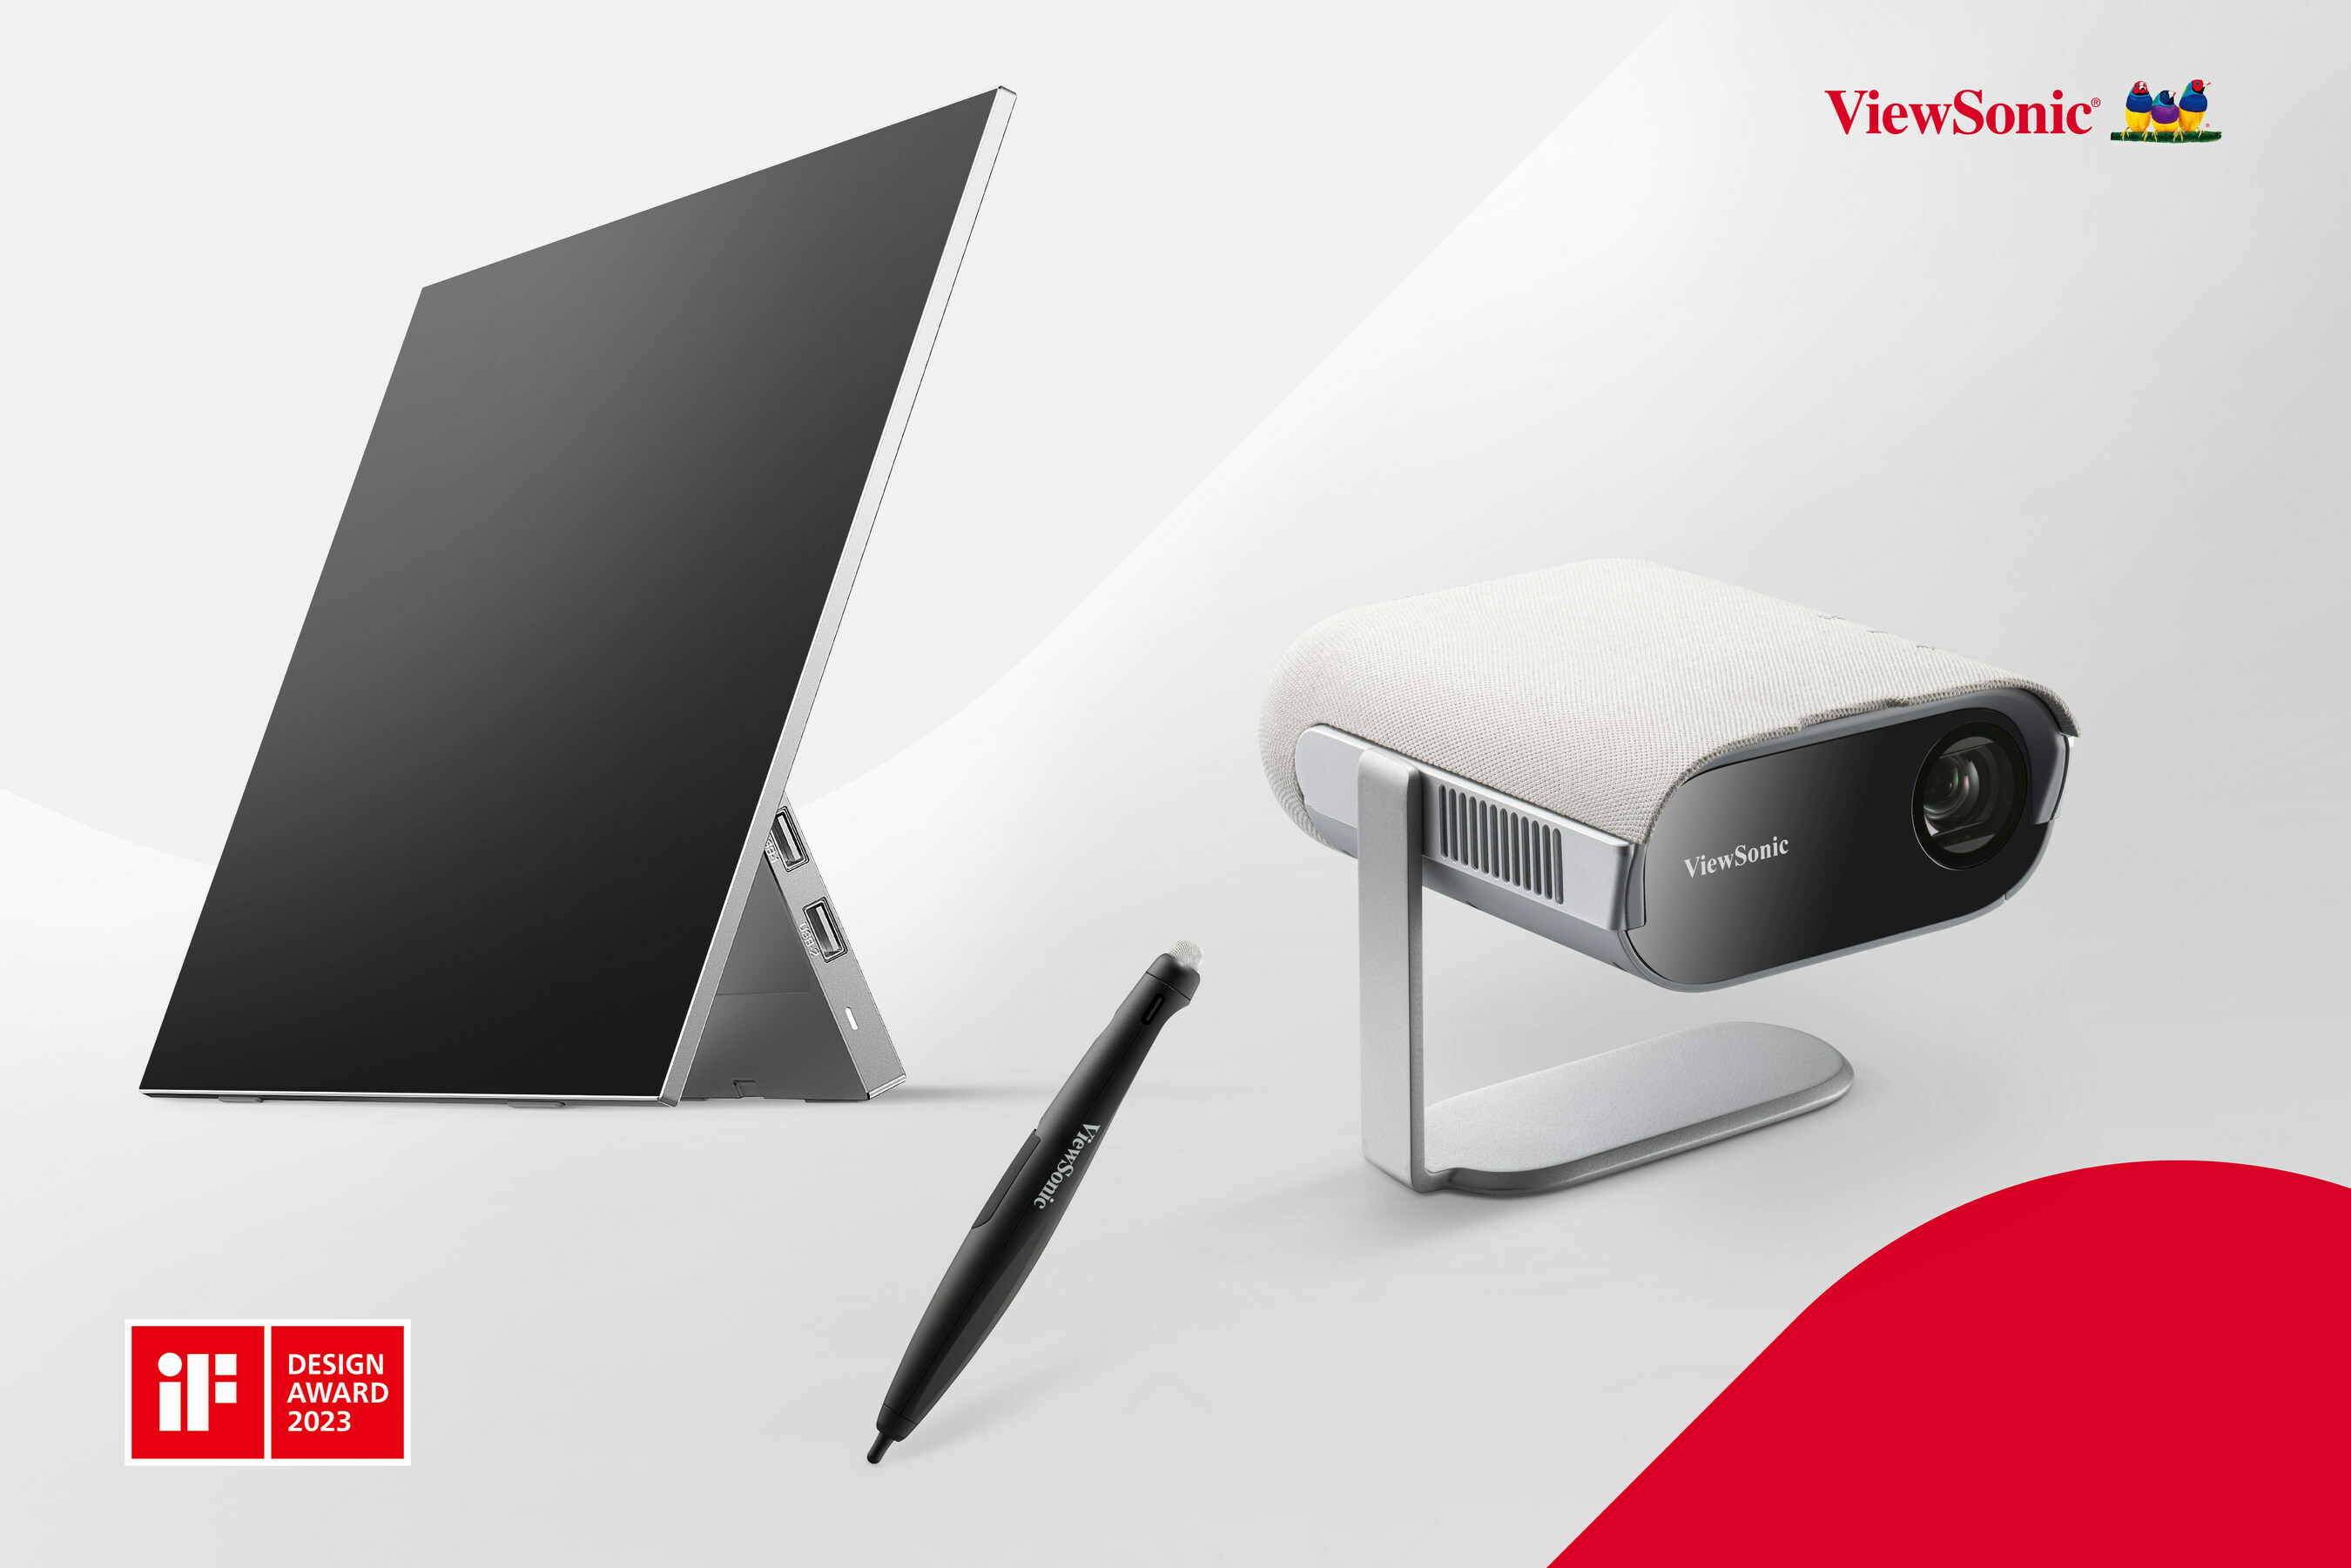 Image of ViewSonic Wins Three iF Design Awards for M1 Pro smart LED portable projector, multi-functional presenter VB-PEN-007, and VX1655-4K-OLED portable display